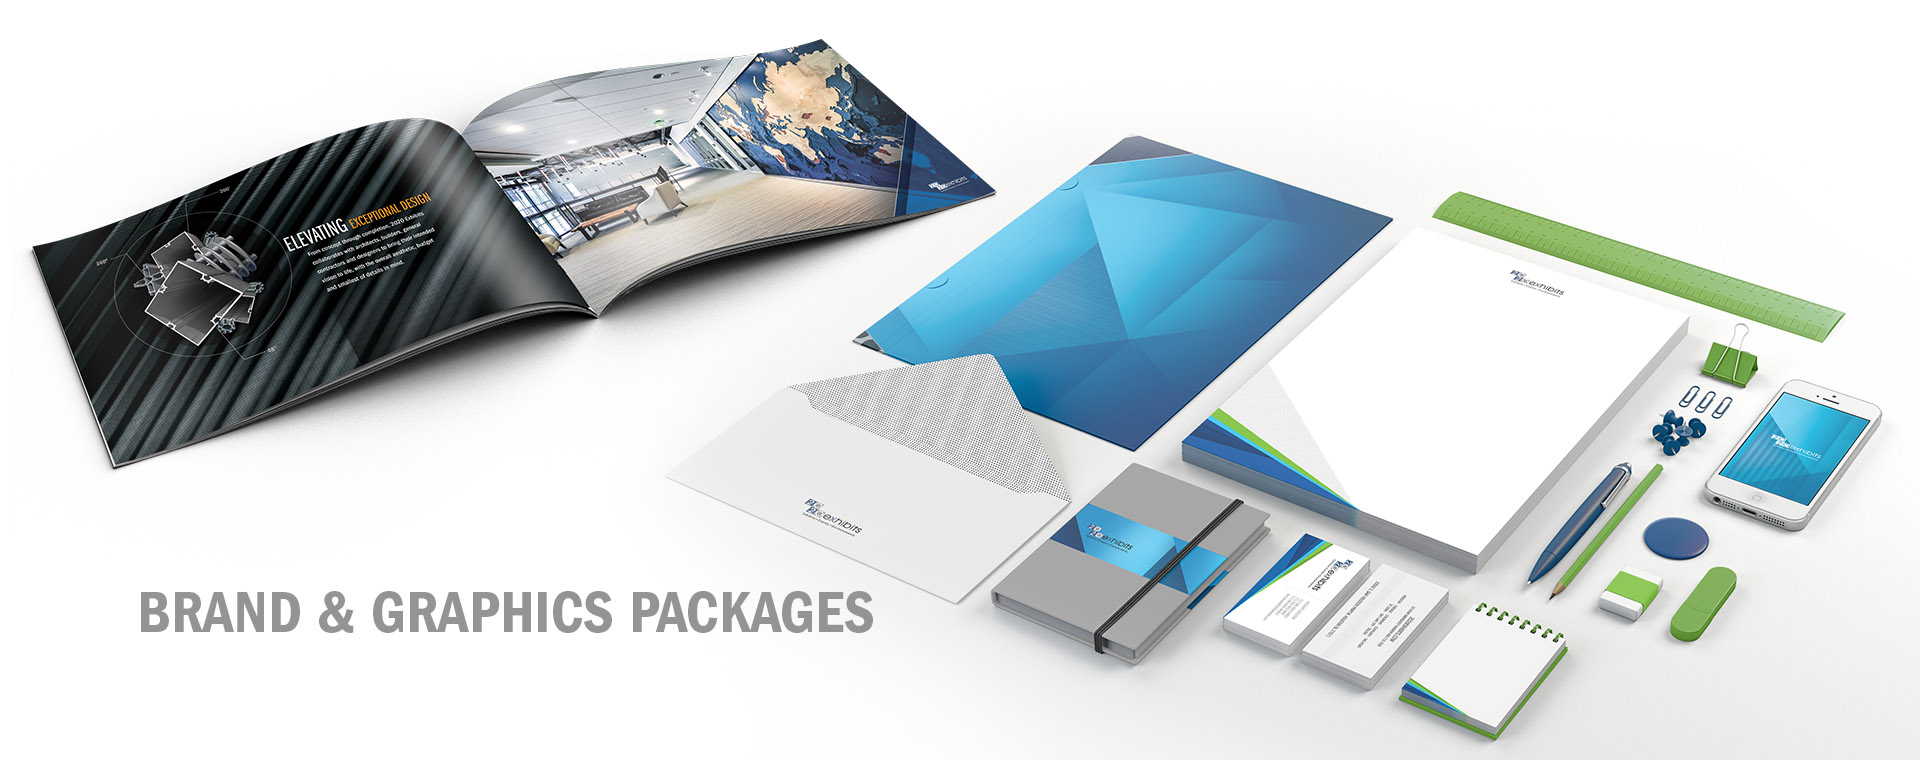 Brand & Graphic Packages